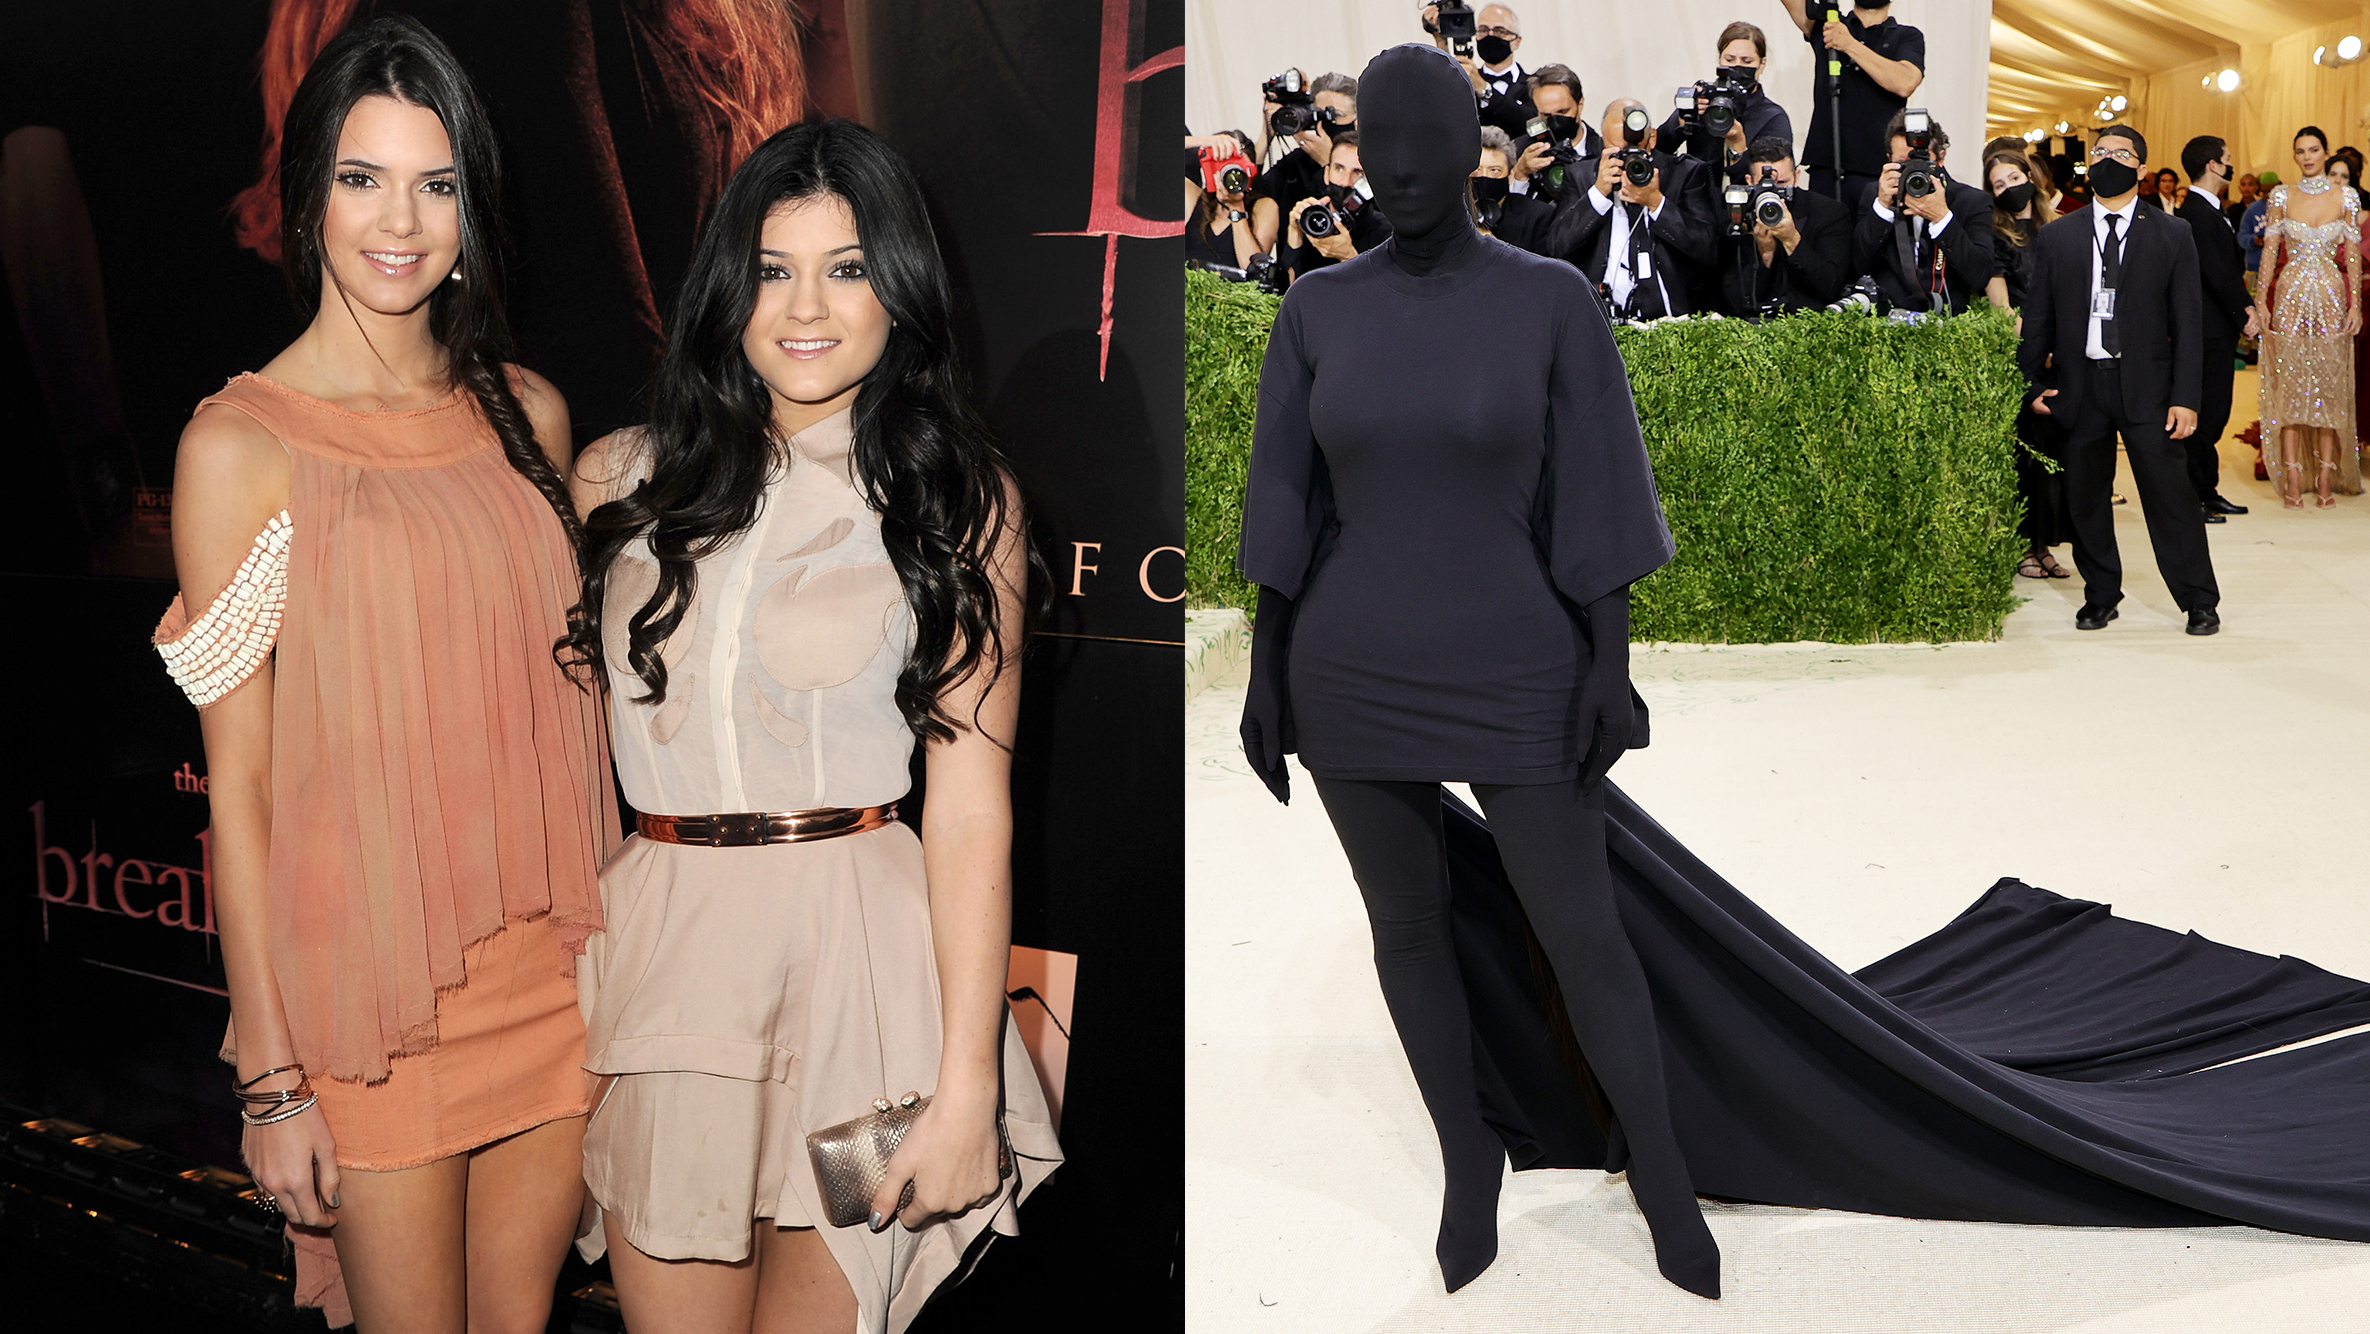 Kendall adds barely-there sandals to a barely-there dress - Vogue